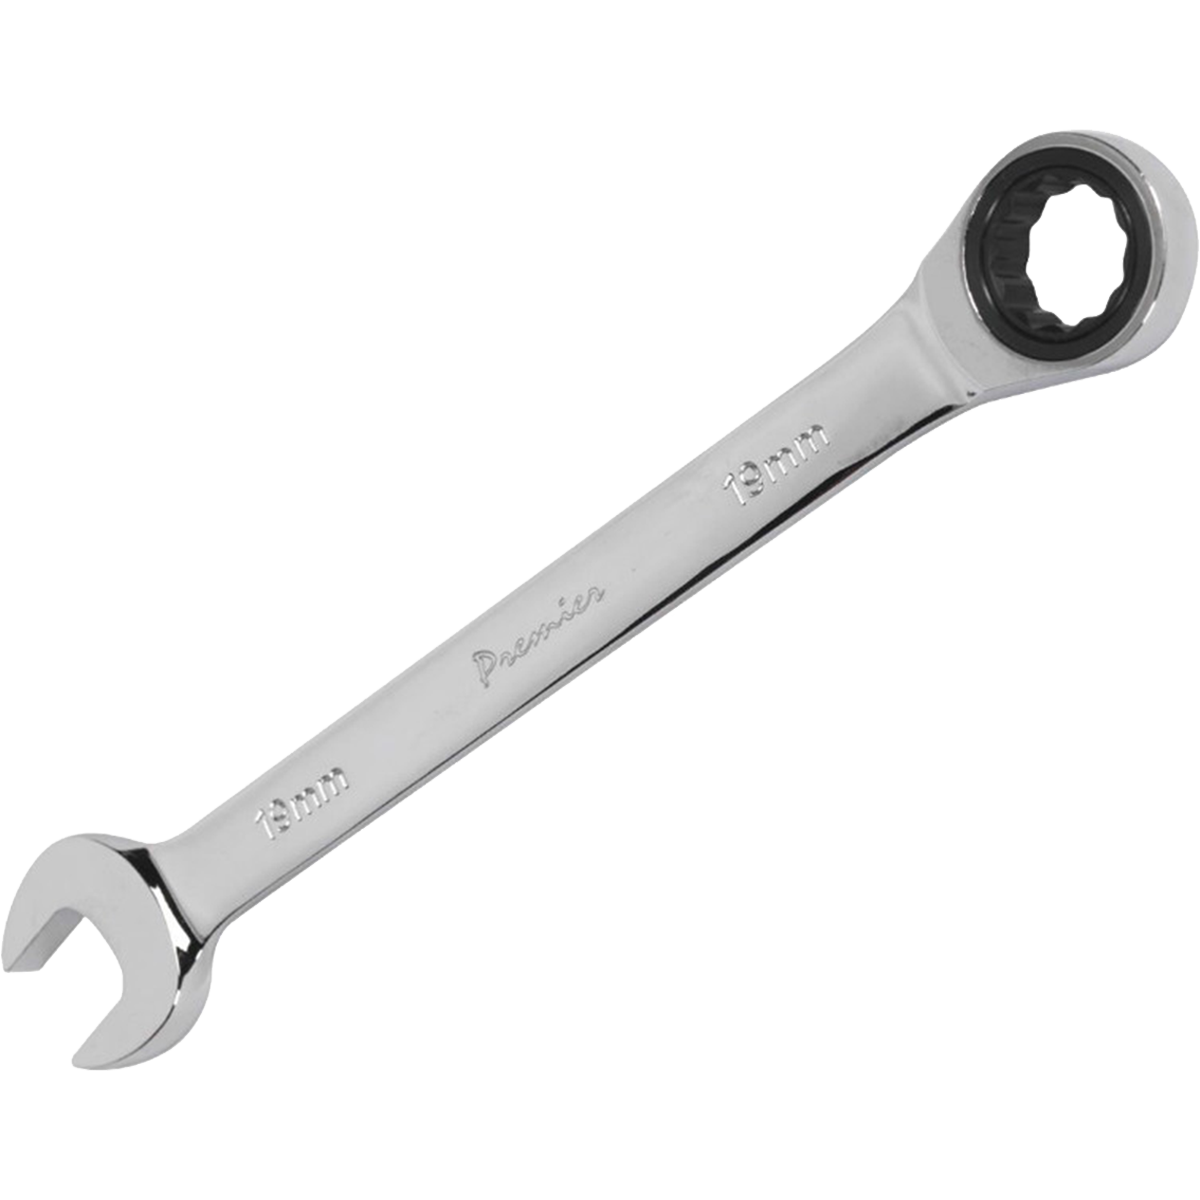 A growing range of Sealey combination ratchet spanners at competitive prices. A dual function combination spanner that offers the flexibility of an open end for quick adjustments and a ratcheting end for efficient fastening in confined spaces